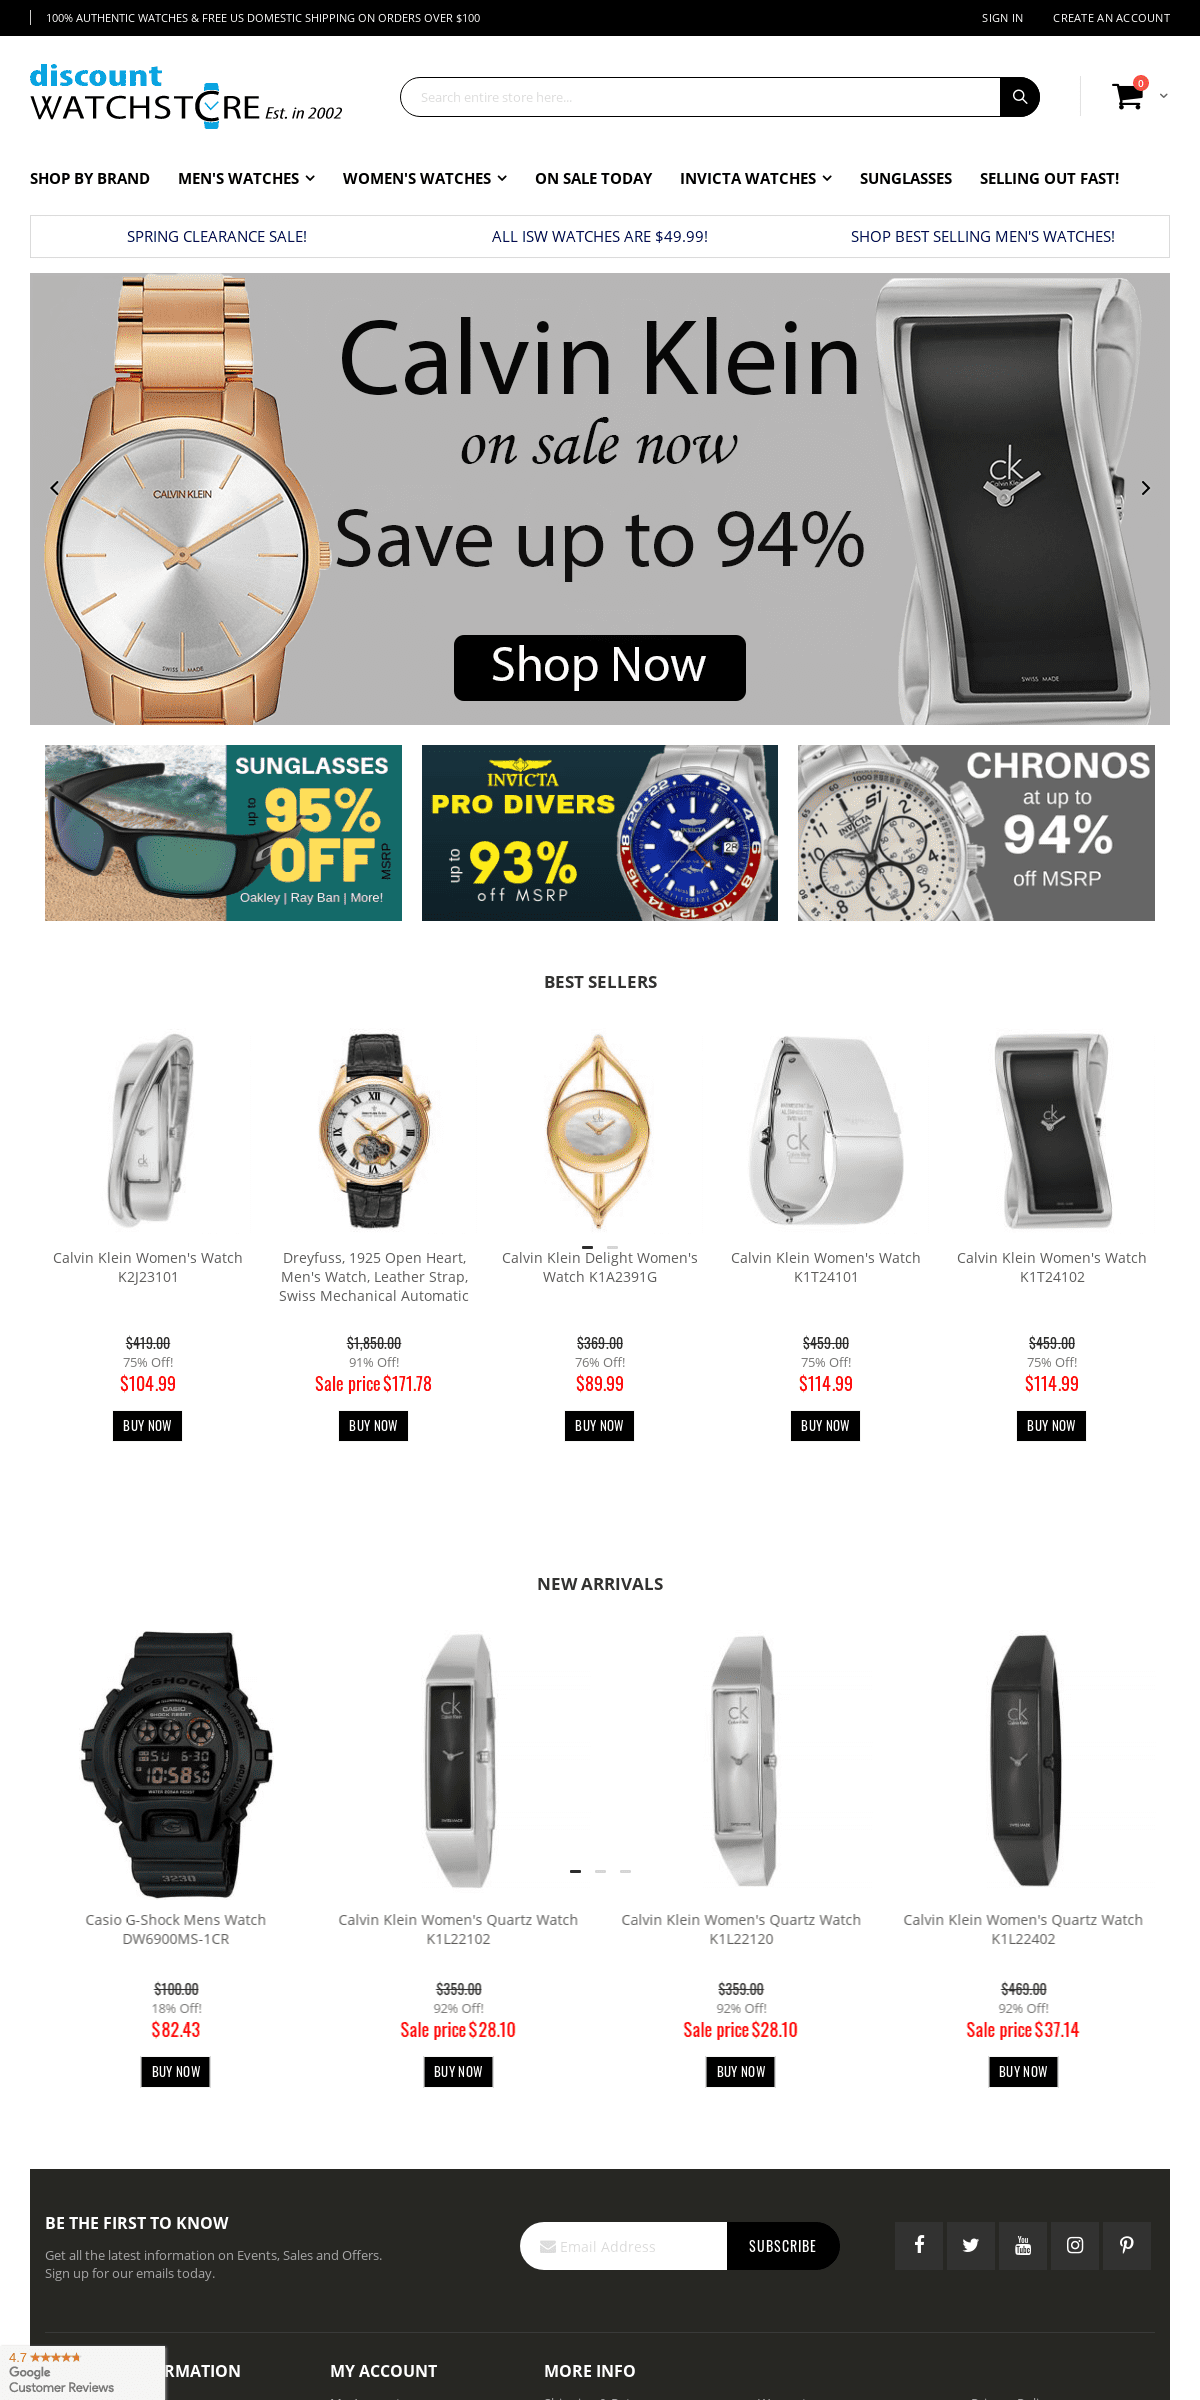 A complete backup of discountwatchstore.com